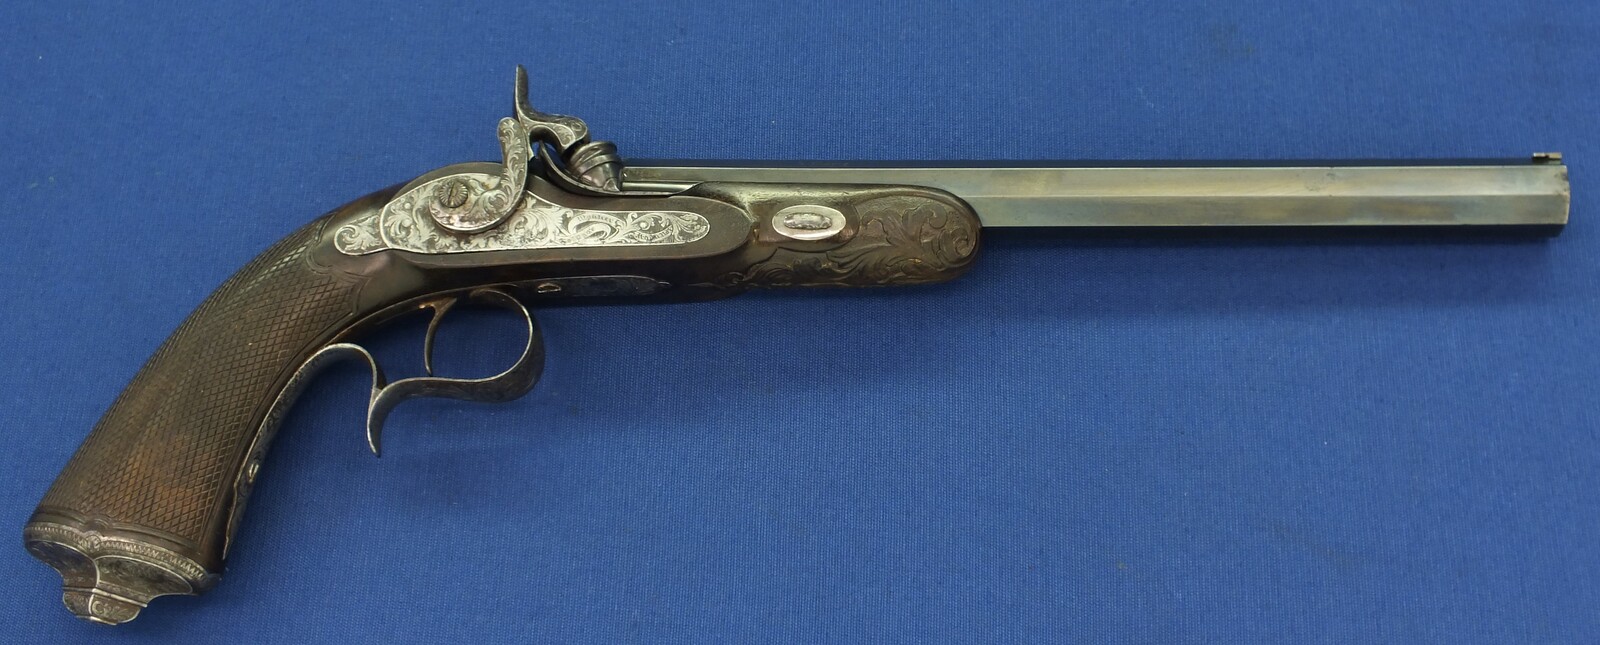 A rare antique French Book cased Percussion Pistol by Lepage-Moutier Arq. du Roi and Geerinckx a Paris. Circa 1850. Caliber 11,5mm, length 43,5cm. Spine of book signed: Remède A Tous Les Maux (A Cure for all Ills). In very good condition. Price 3.250 euro